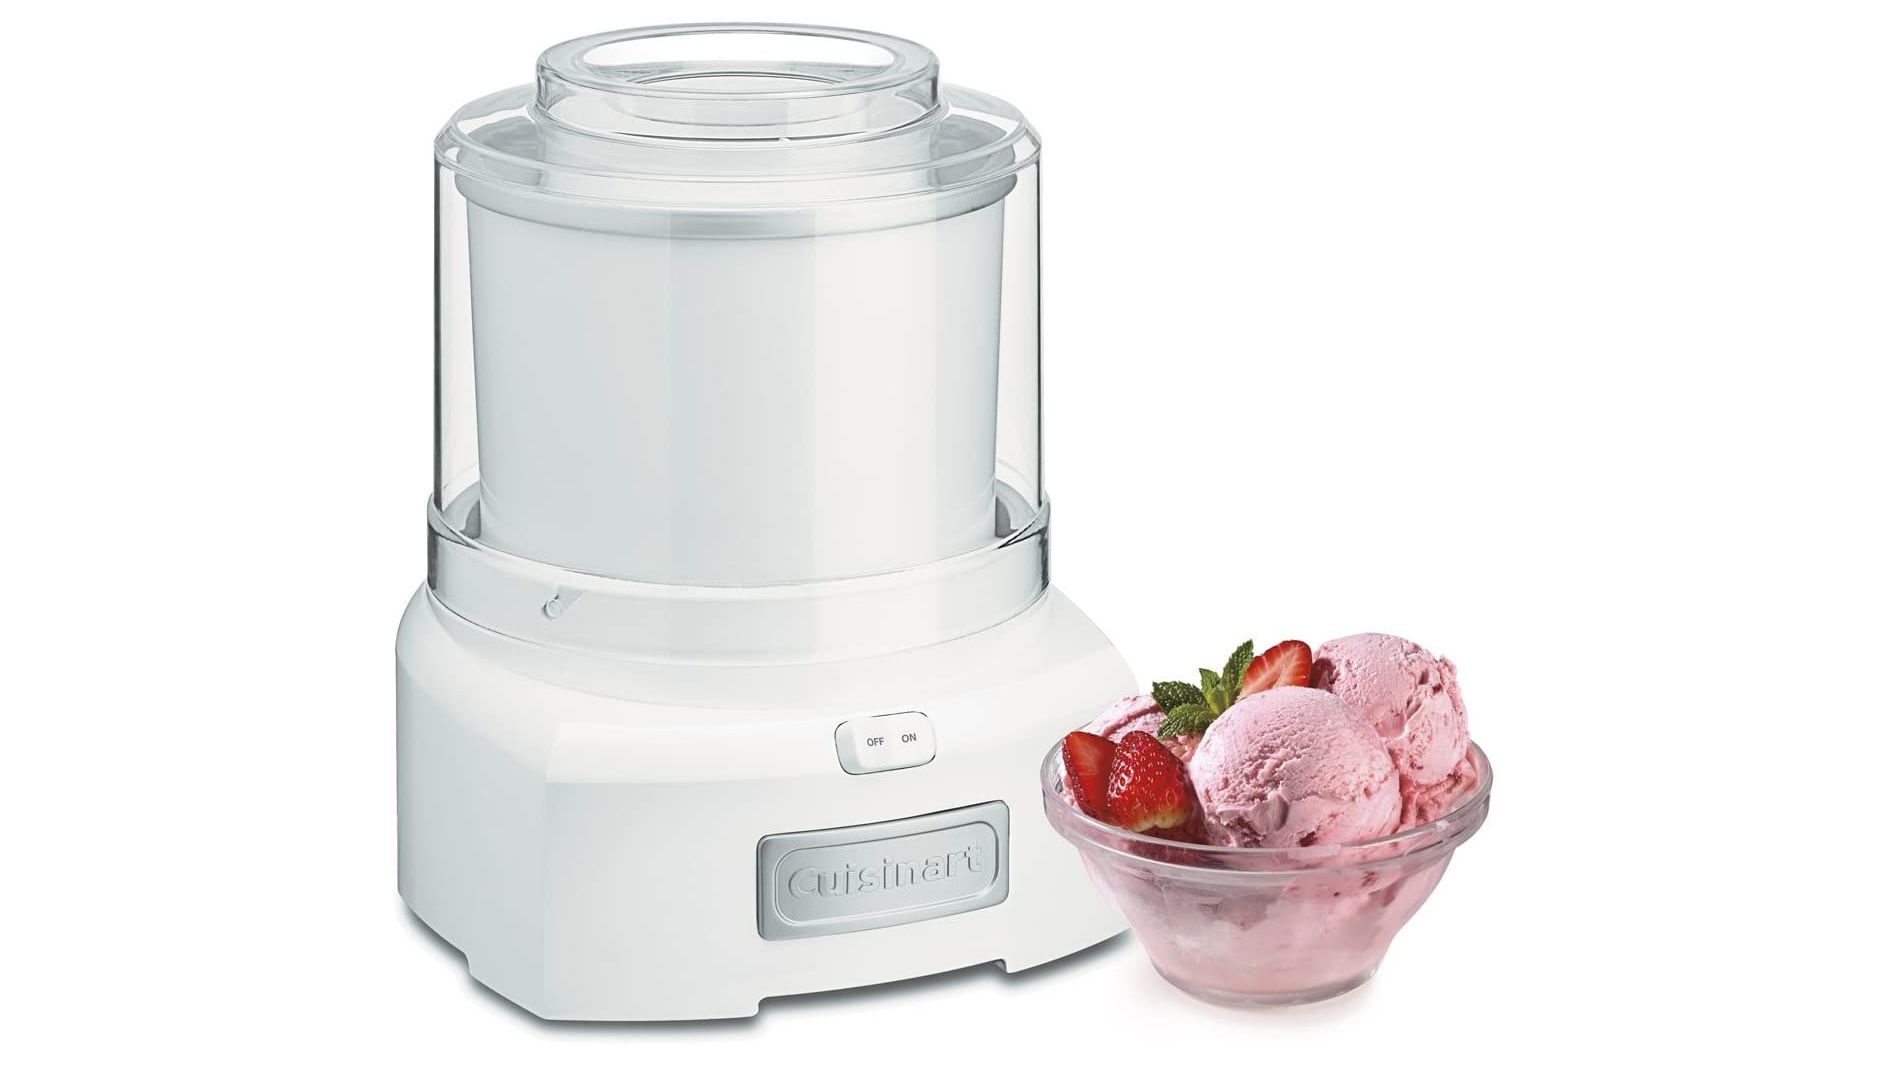 Cuisinart Ice Cream Maker Review 2023 - Tested With Photos